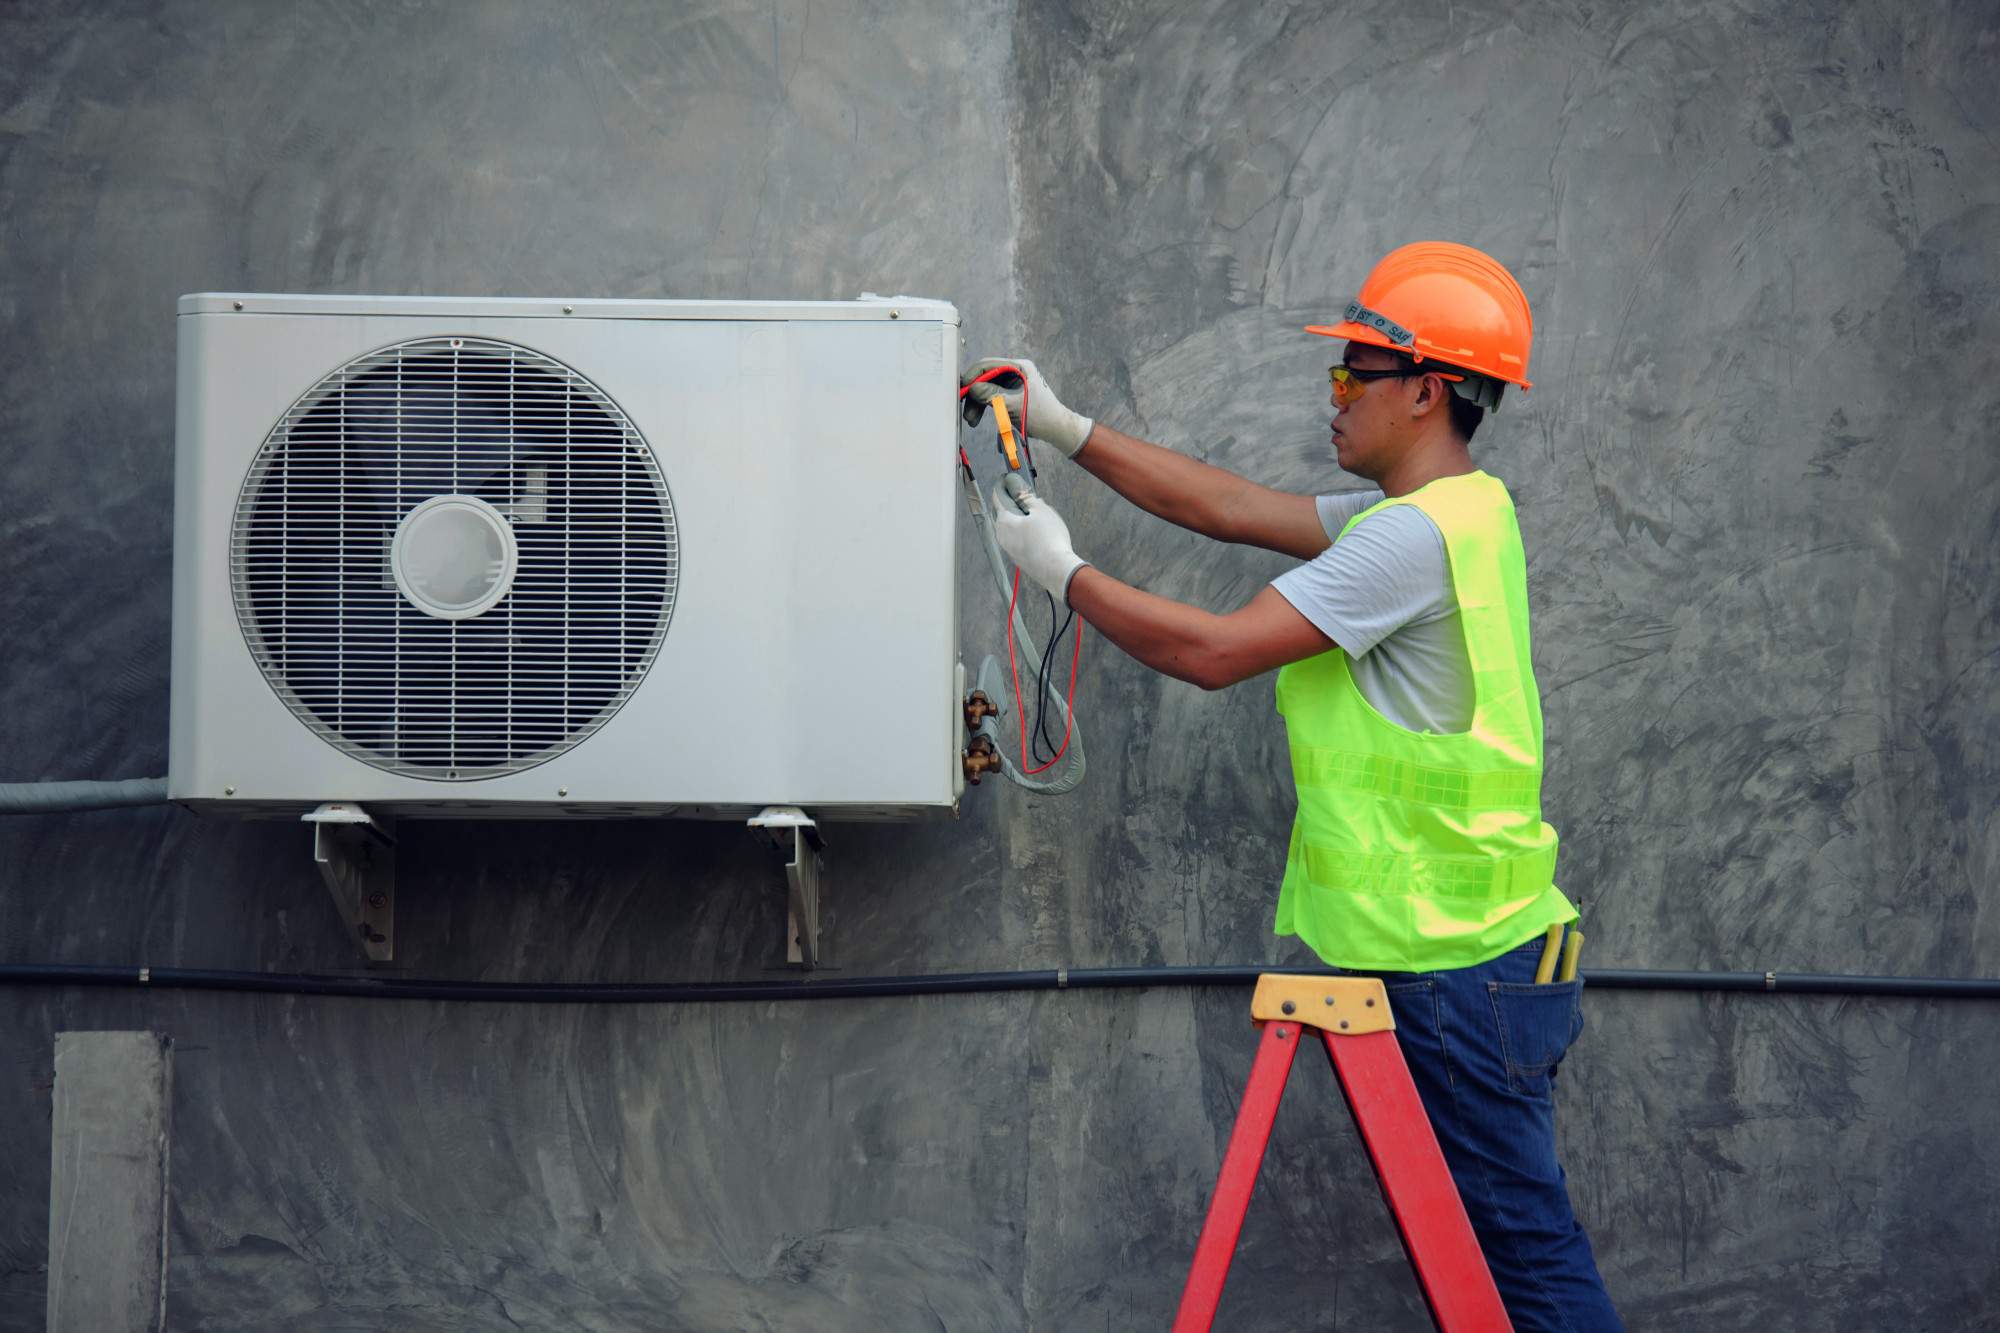 How to Choose the Best Home HVAC System